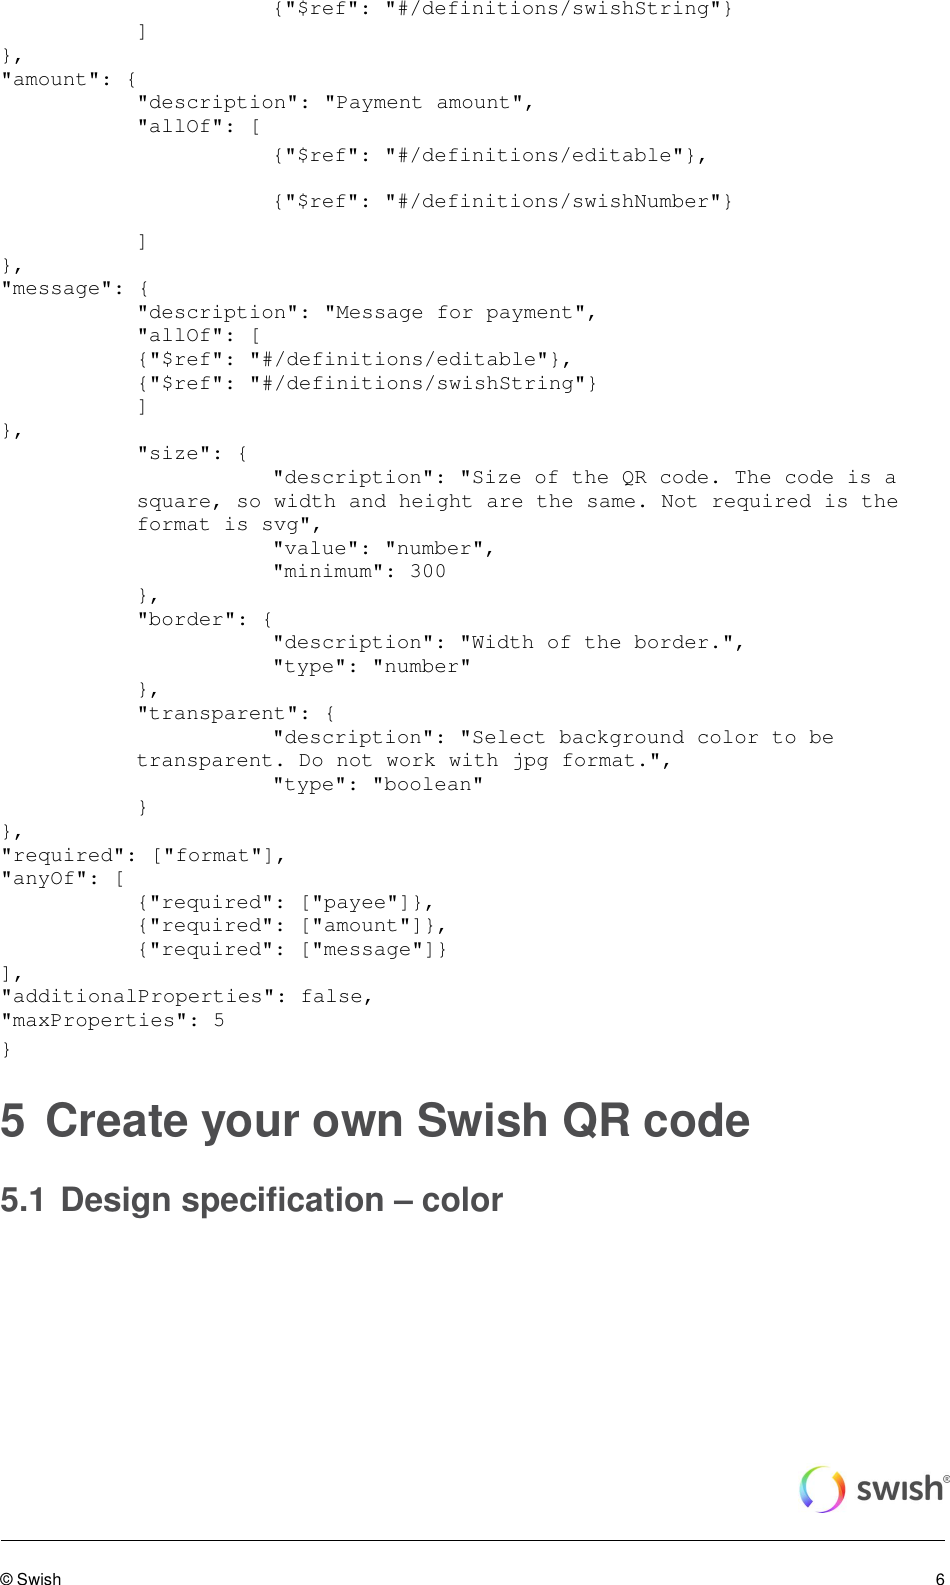 Page 6 of 8 - Guide-Swish-QR-code-design-specification V1.5